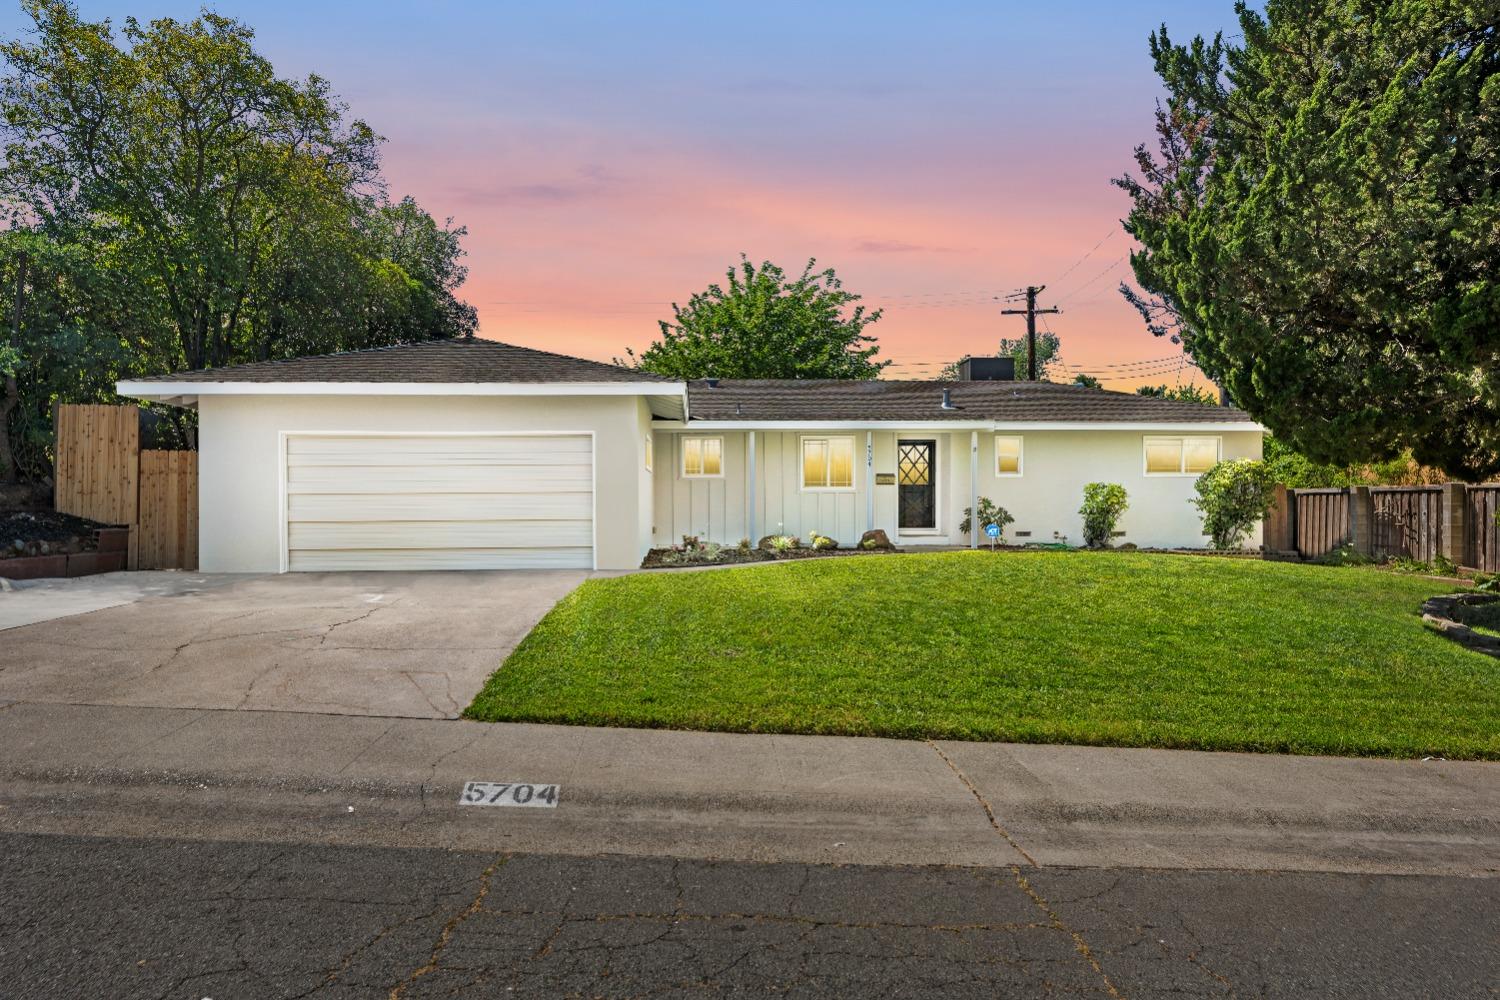 Photo of 5704 Raybel Ave in Sacramento, CA